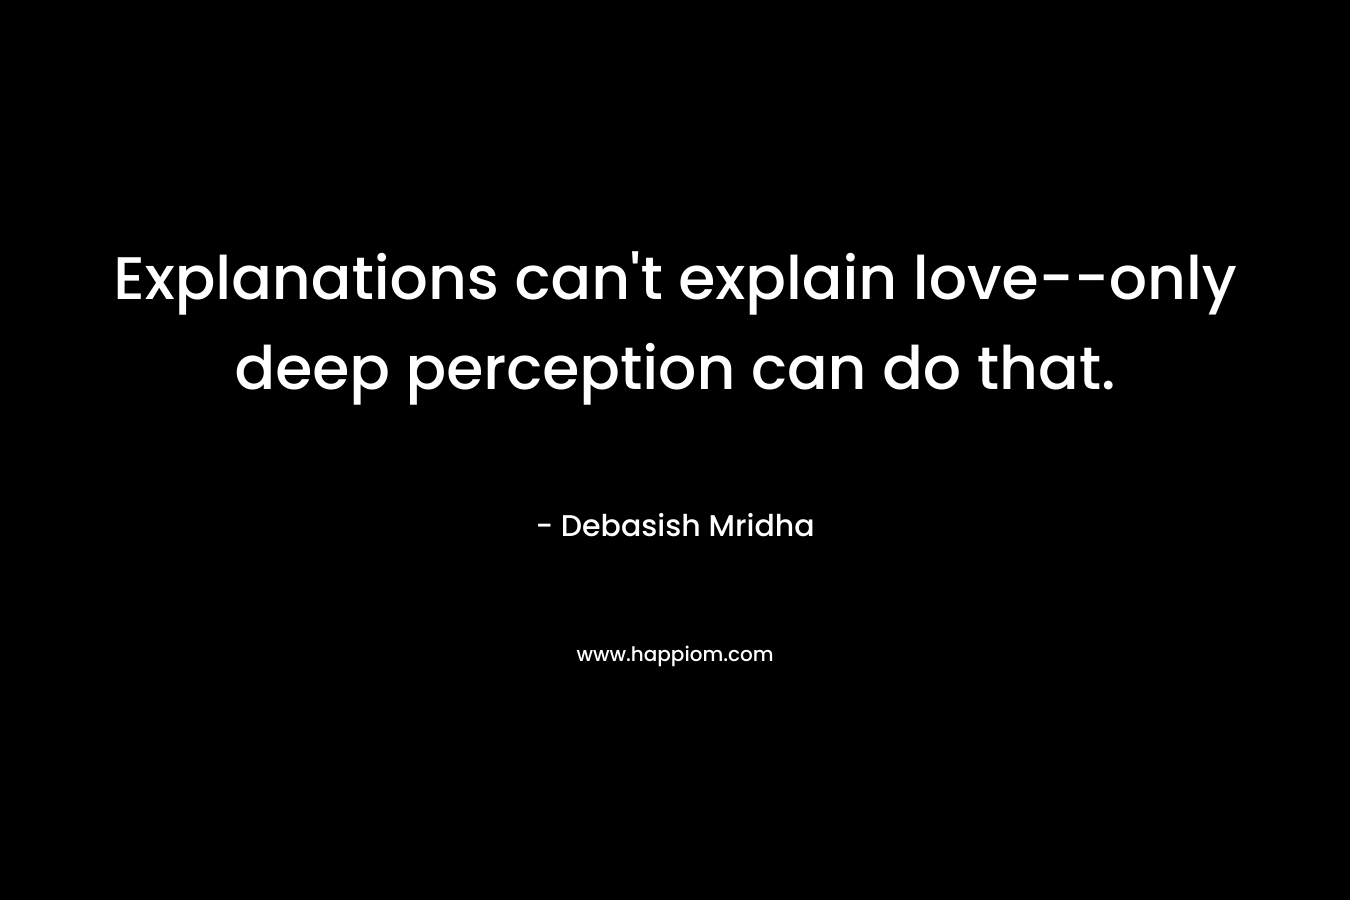 Explanations can't explain love--only deep perception can do that.